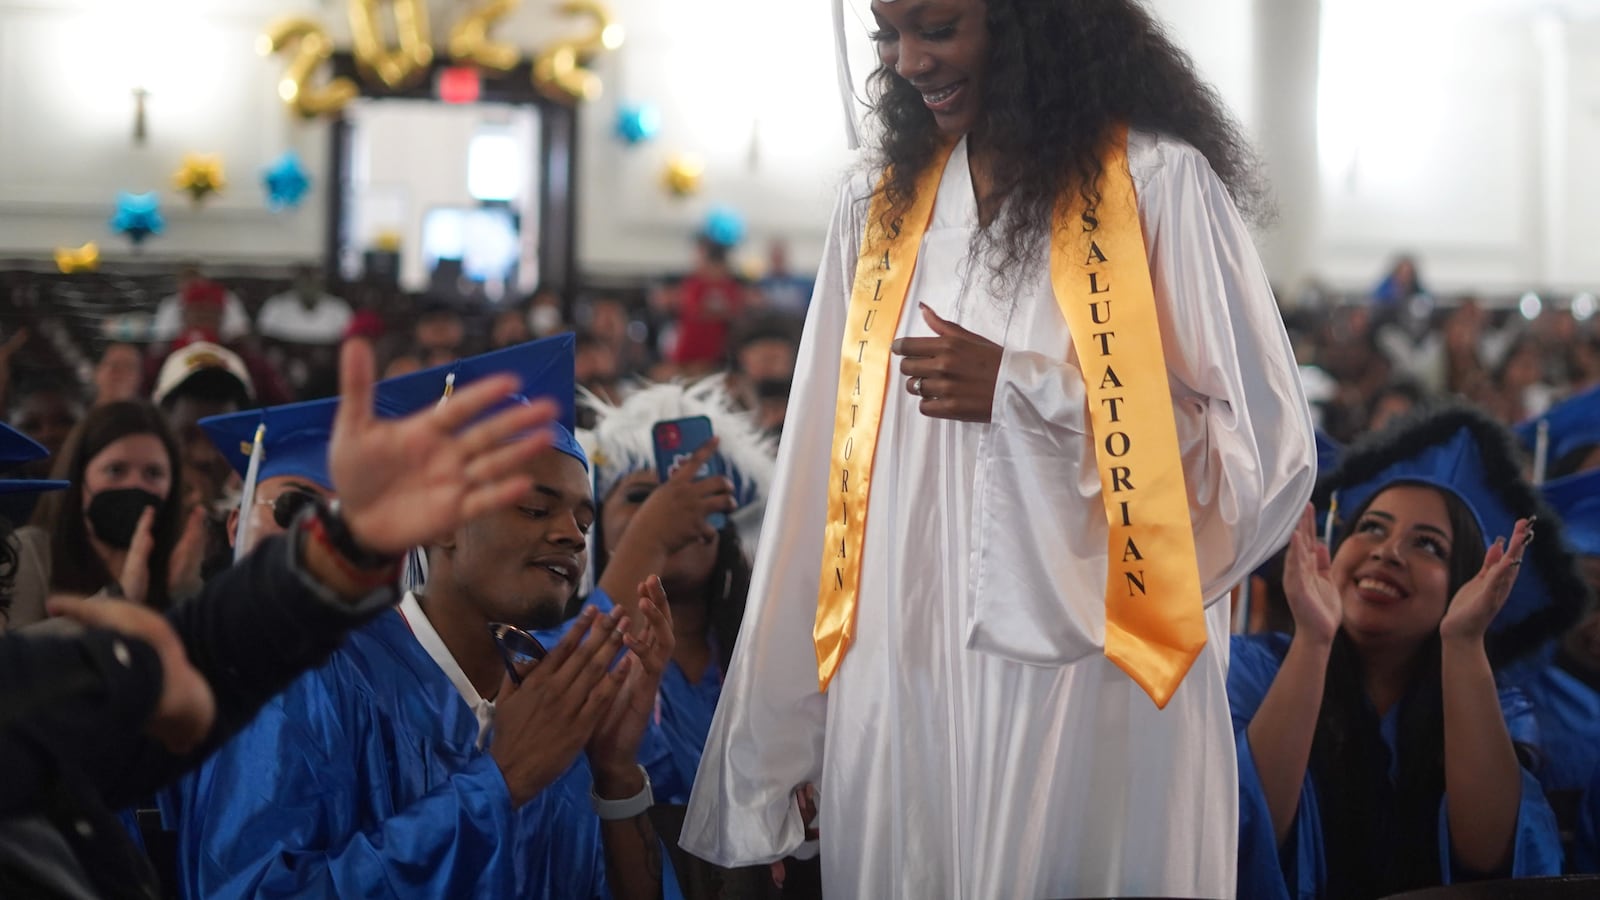 A young woman, wearing a white cap and gown with a yellow salutatorian sash, stands to give her address to classmates and family members.